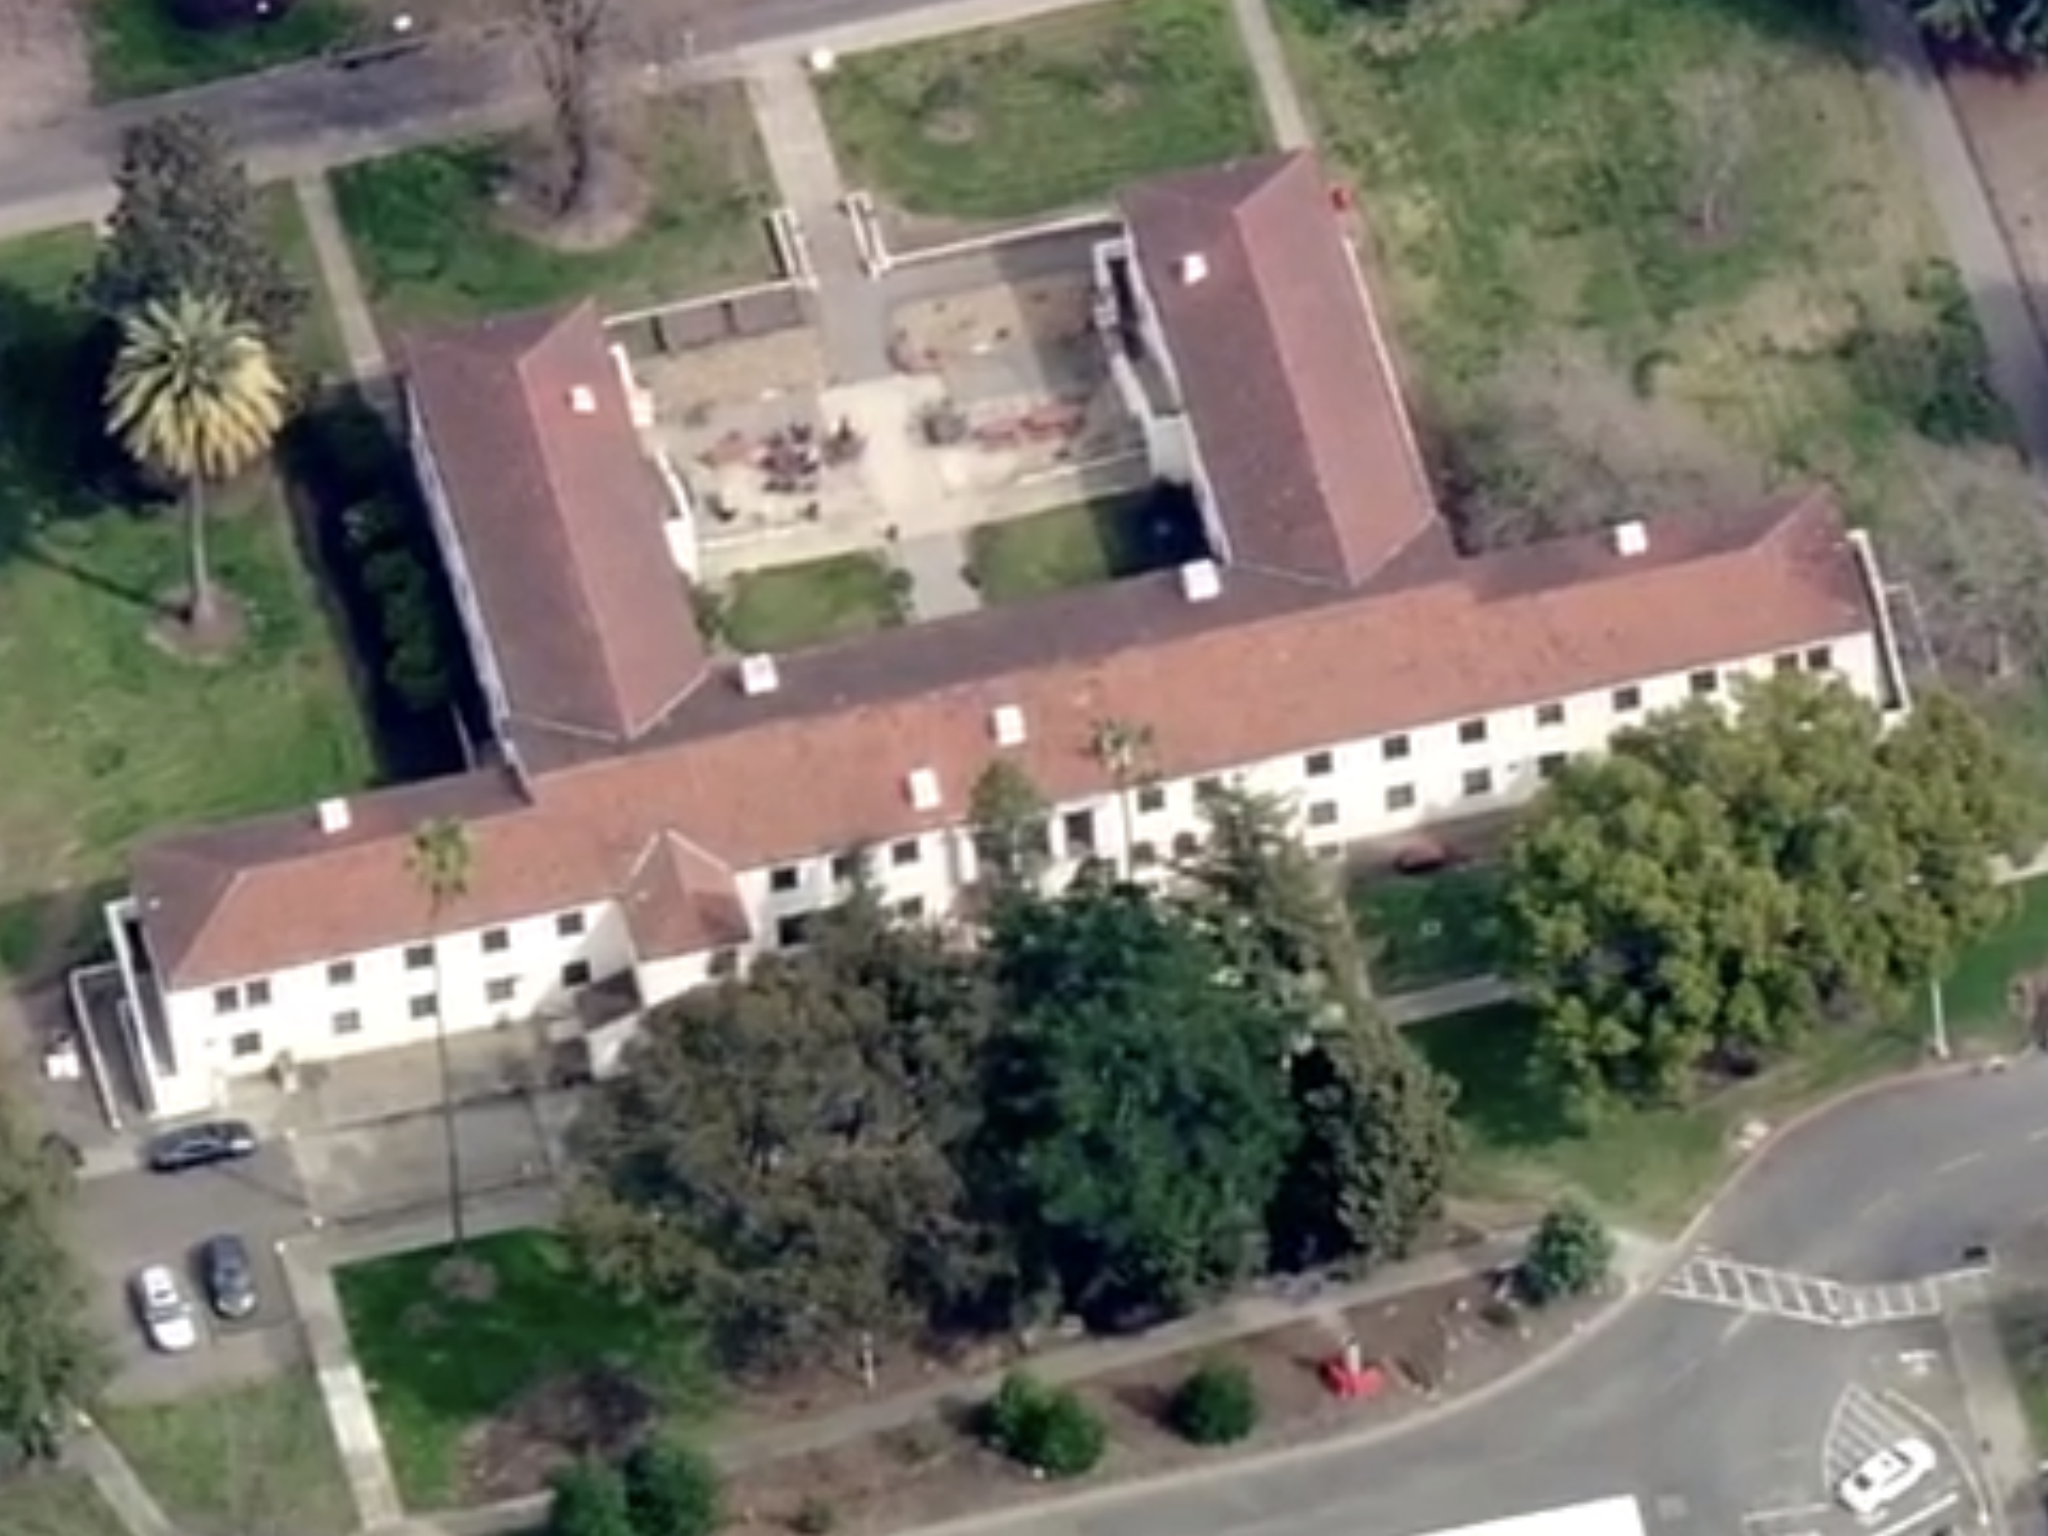 An aerial view of the veteran's home in Yountville, California